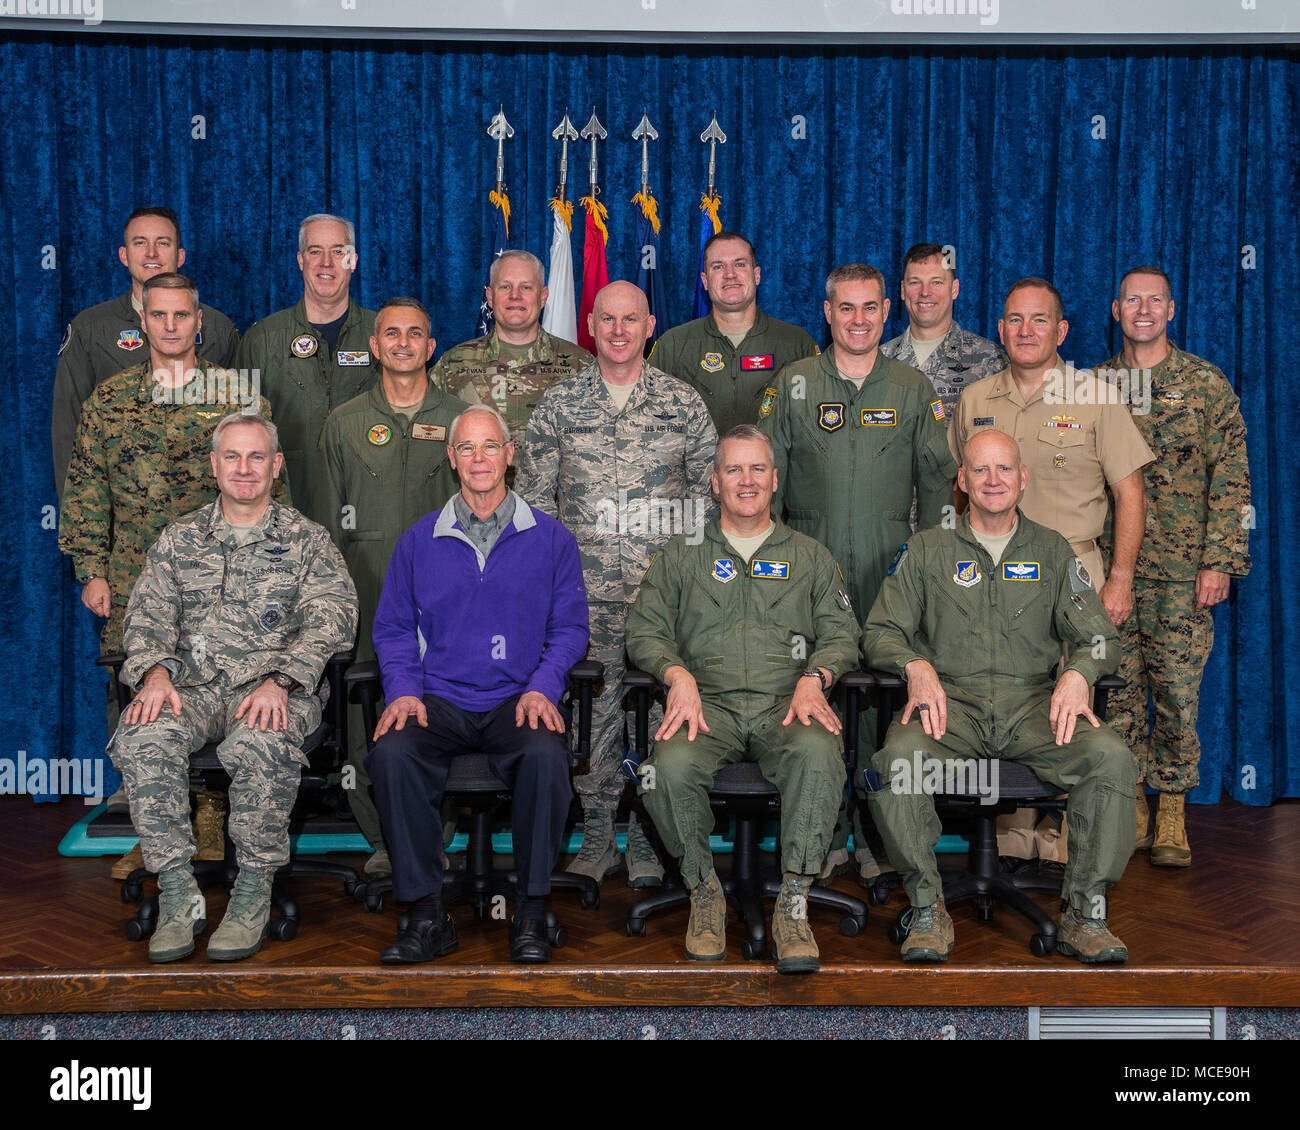 Maxwell AFB, Ala. – Senior leader attendees of the Joint Force Air Component Commander Course 18A pose for a group photo at the Air Force Wargaming Institute, Feb. 12, 2018. Front row (L-R): Major General Timothy G. Fay (USAF); Major General (Ret) William Holland (USAF); Major General James A. Jacobson (USAF); Major General James O. Eifert (ANG). Second Row (L-R): Brigadier General Christopher J. Mahoney (USMC); Brigadier General David J. Julazadeh (USAF); Major General Sam C. Barrett (USAF); Brigadier General Lenny J. Richoux (USAF); Rear Admiral Edward B. Cashman (USN). Third Row (L-R): Brig Stock Photo